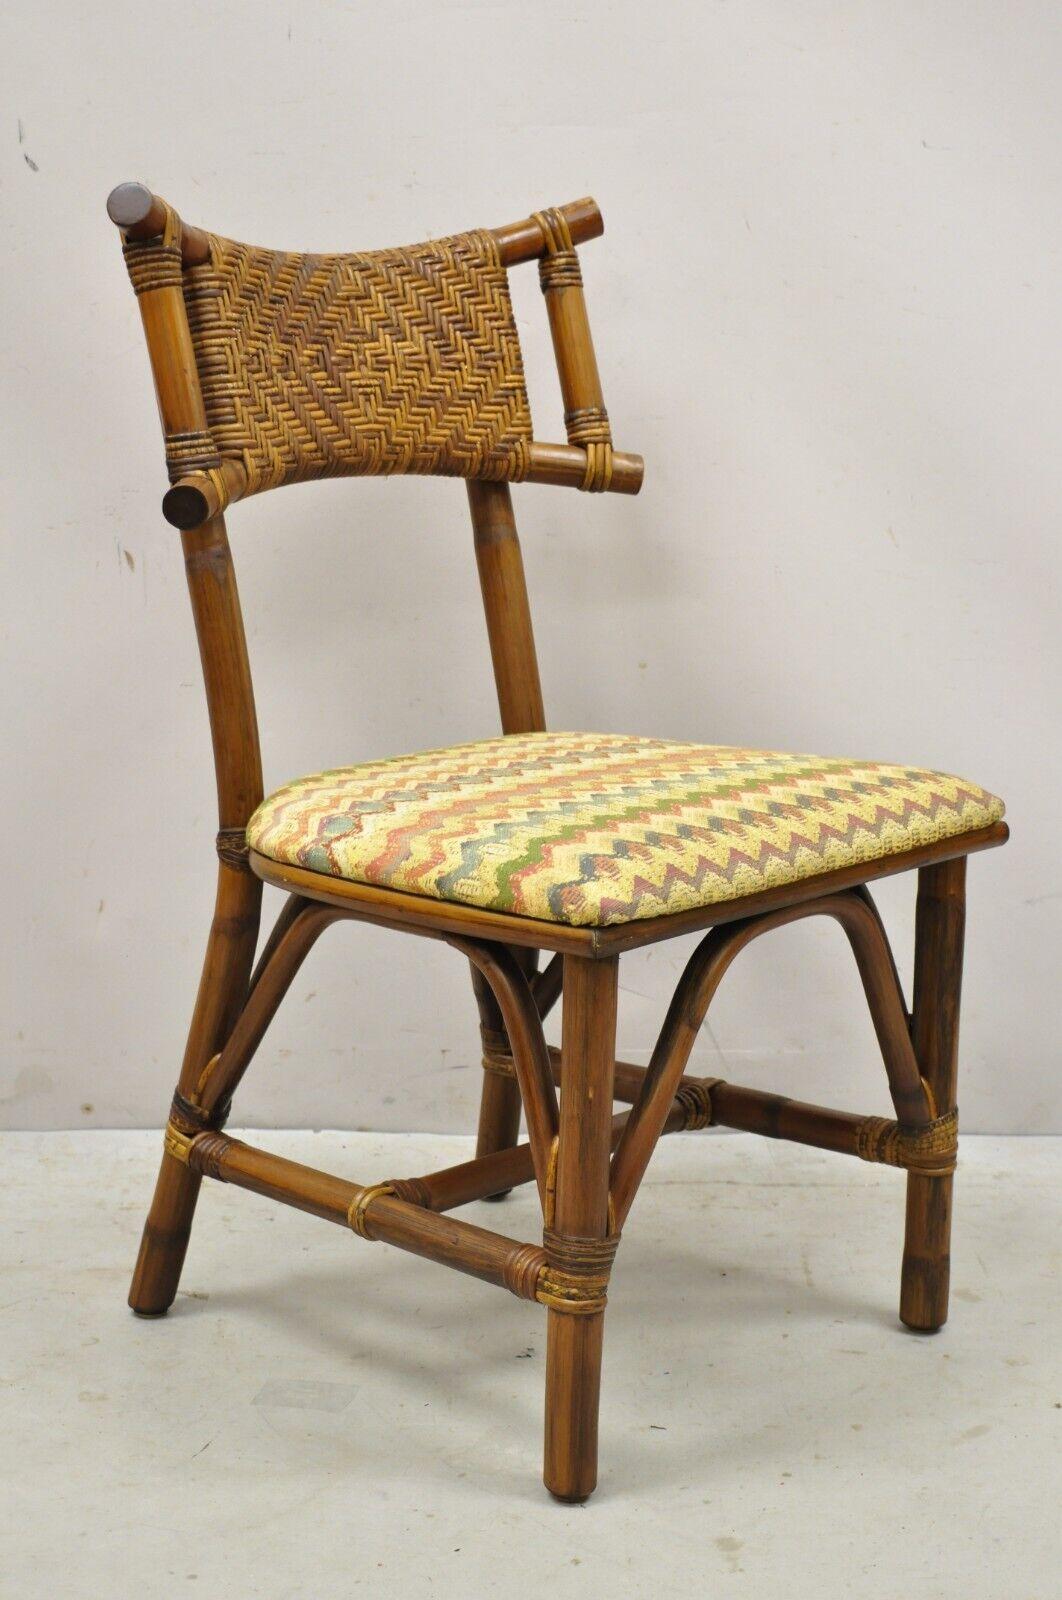 Vintage Bentwood Bamboo Rattan Tiki Hollywood Regency dining chairs - Set of 4. Item features (4) Side chairs, bentwood frames, rattan wrapped backs, very nice vintage set, great style and form. Circa Mid to late 20th Century. Measurements: 35